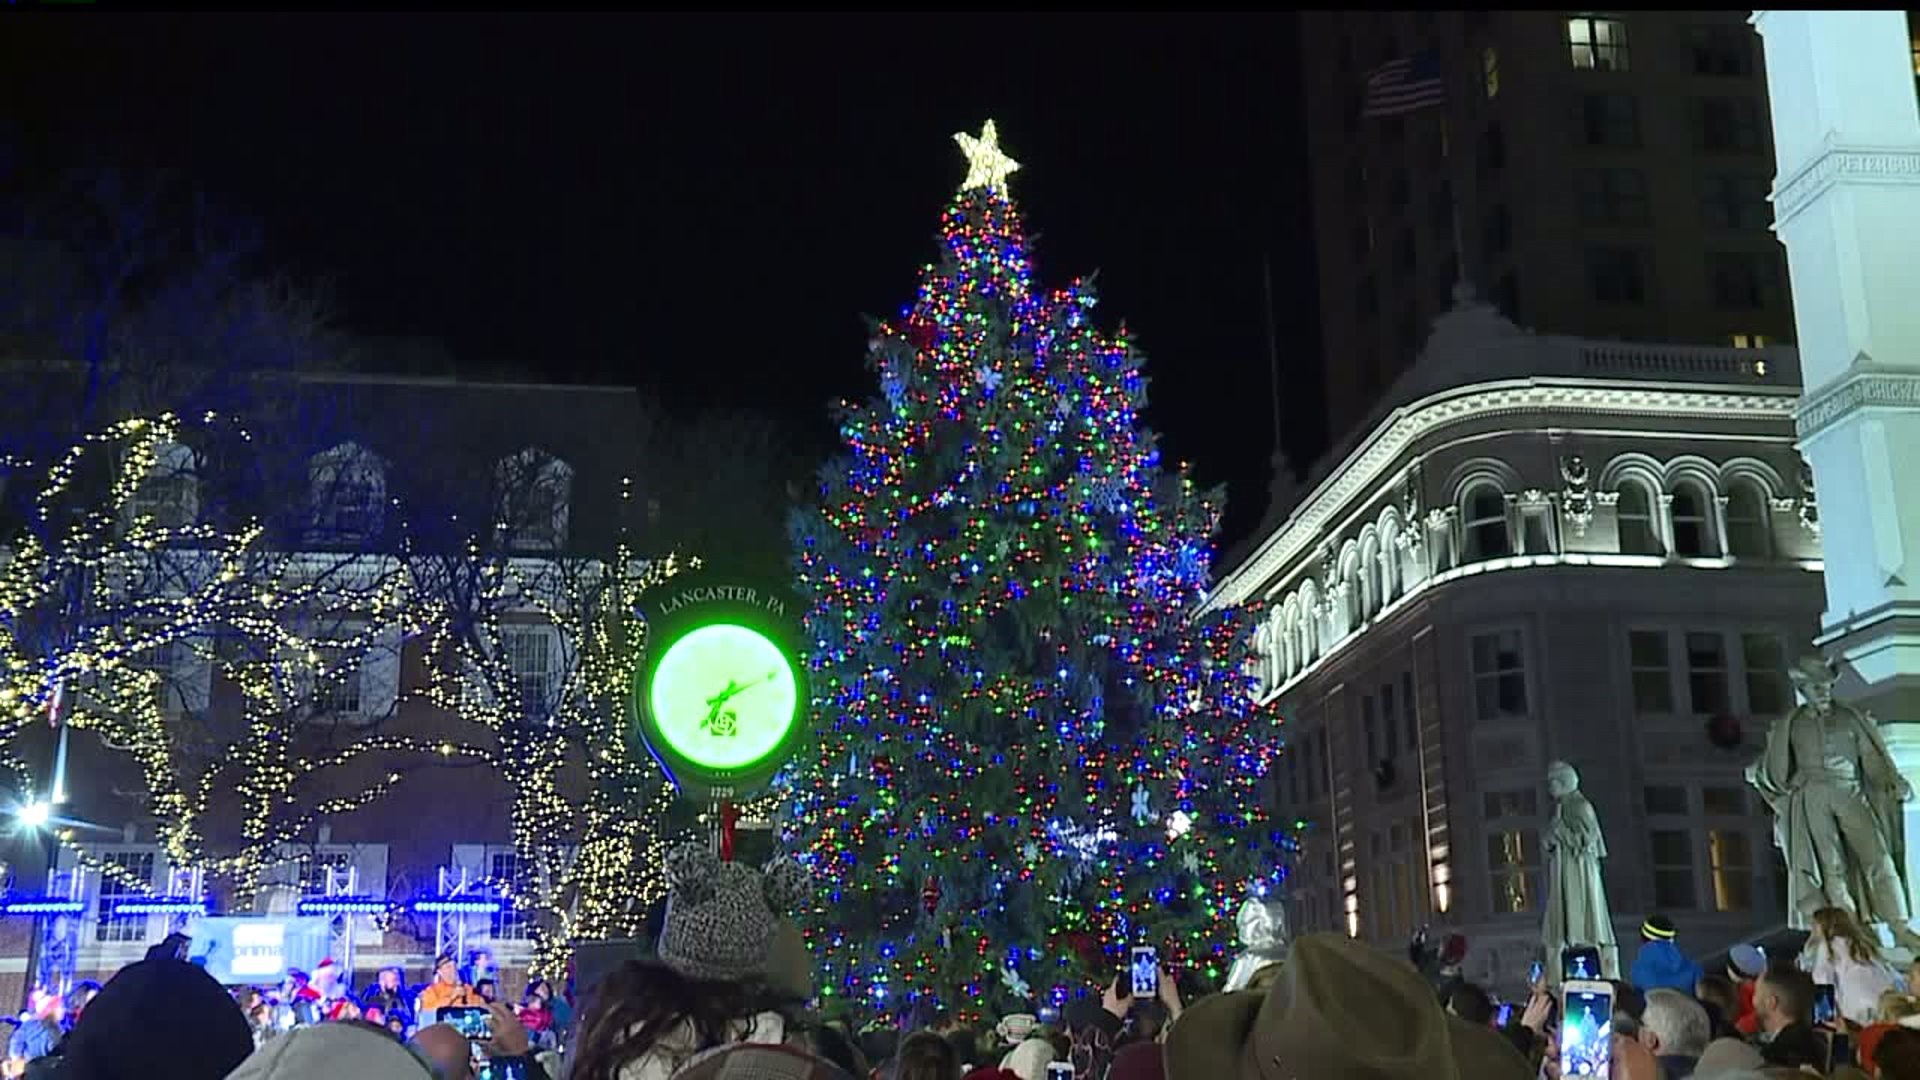 Annual Mayor`s Tree Lighting in Lancaster draws thousands to Penn Square for caroling, Tuba Christmas, and a visit from Santa Claus